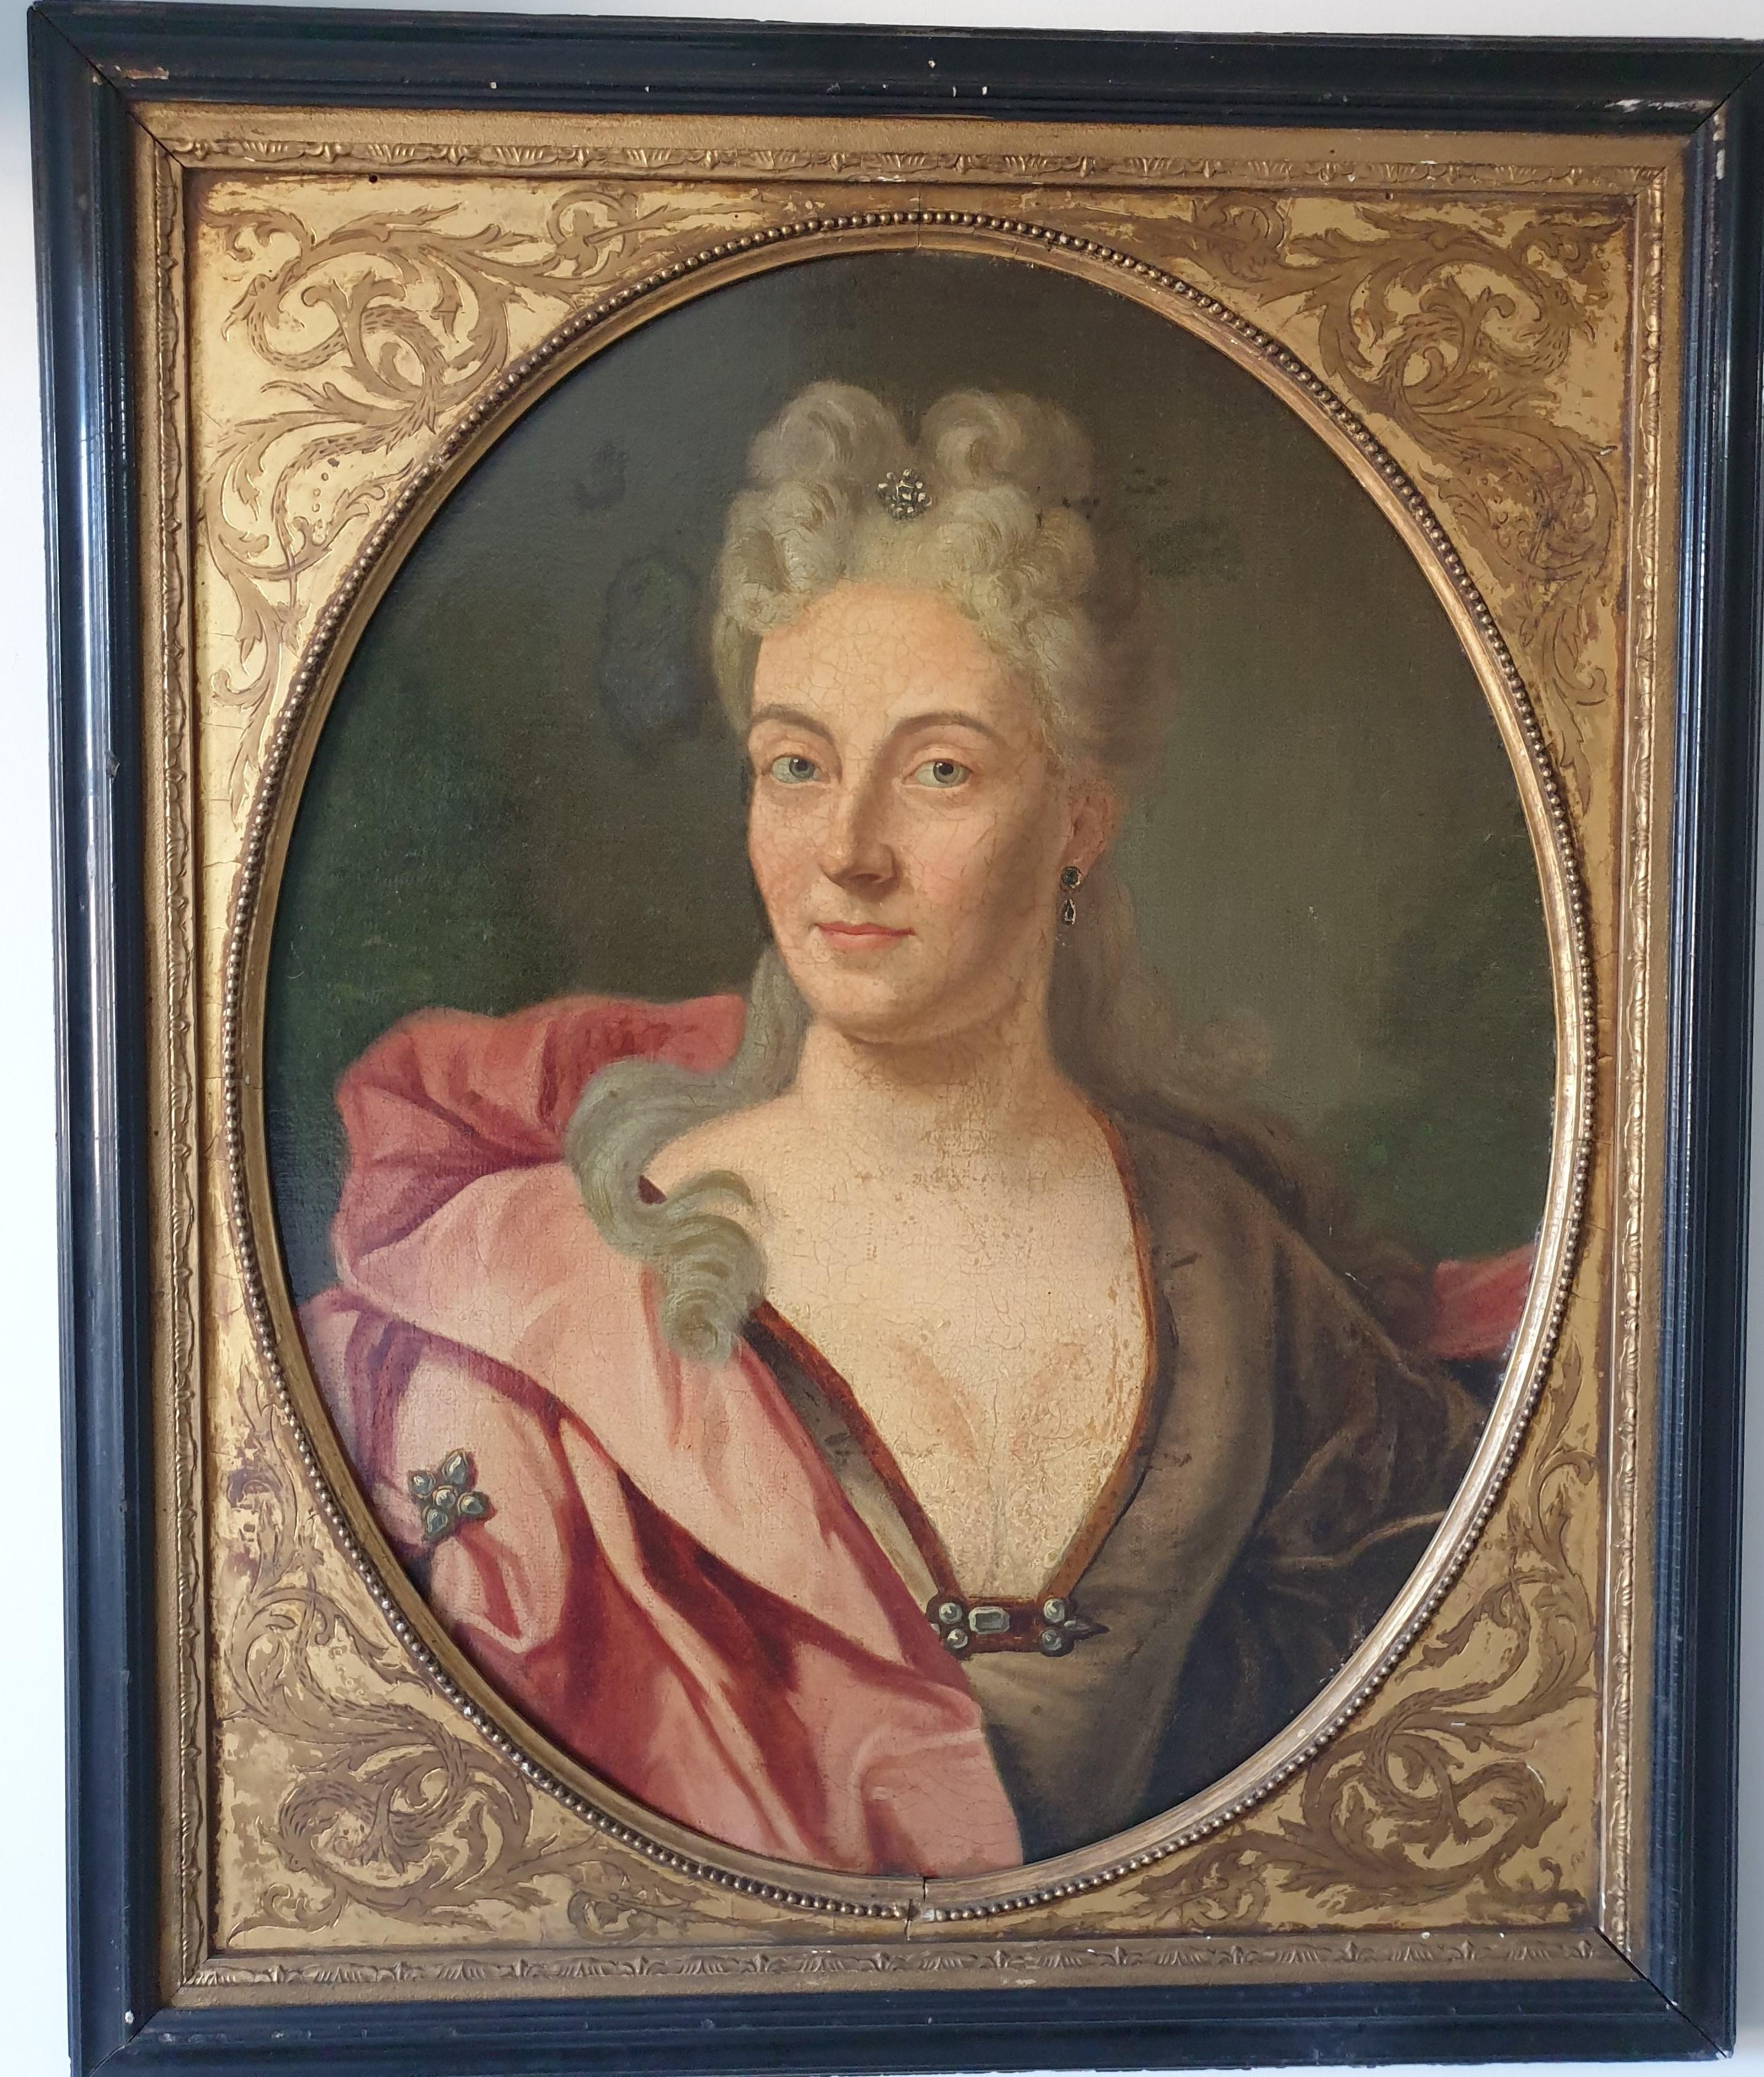 School of Largillierre, Portrait of a Lady of the Verheyden Family. The original frame is black lacquered wood with gilt insert.
Nicolas de Largilliere (1656-1746), was born in Paris, then moved to Antwerp at the age of three. At the age of eighteen